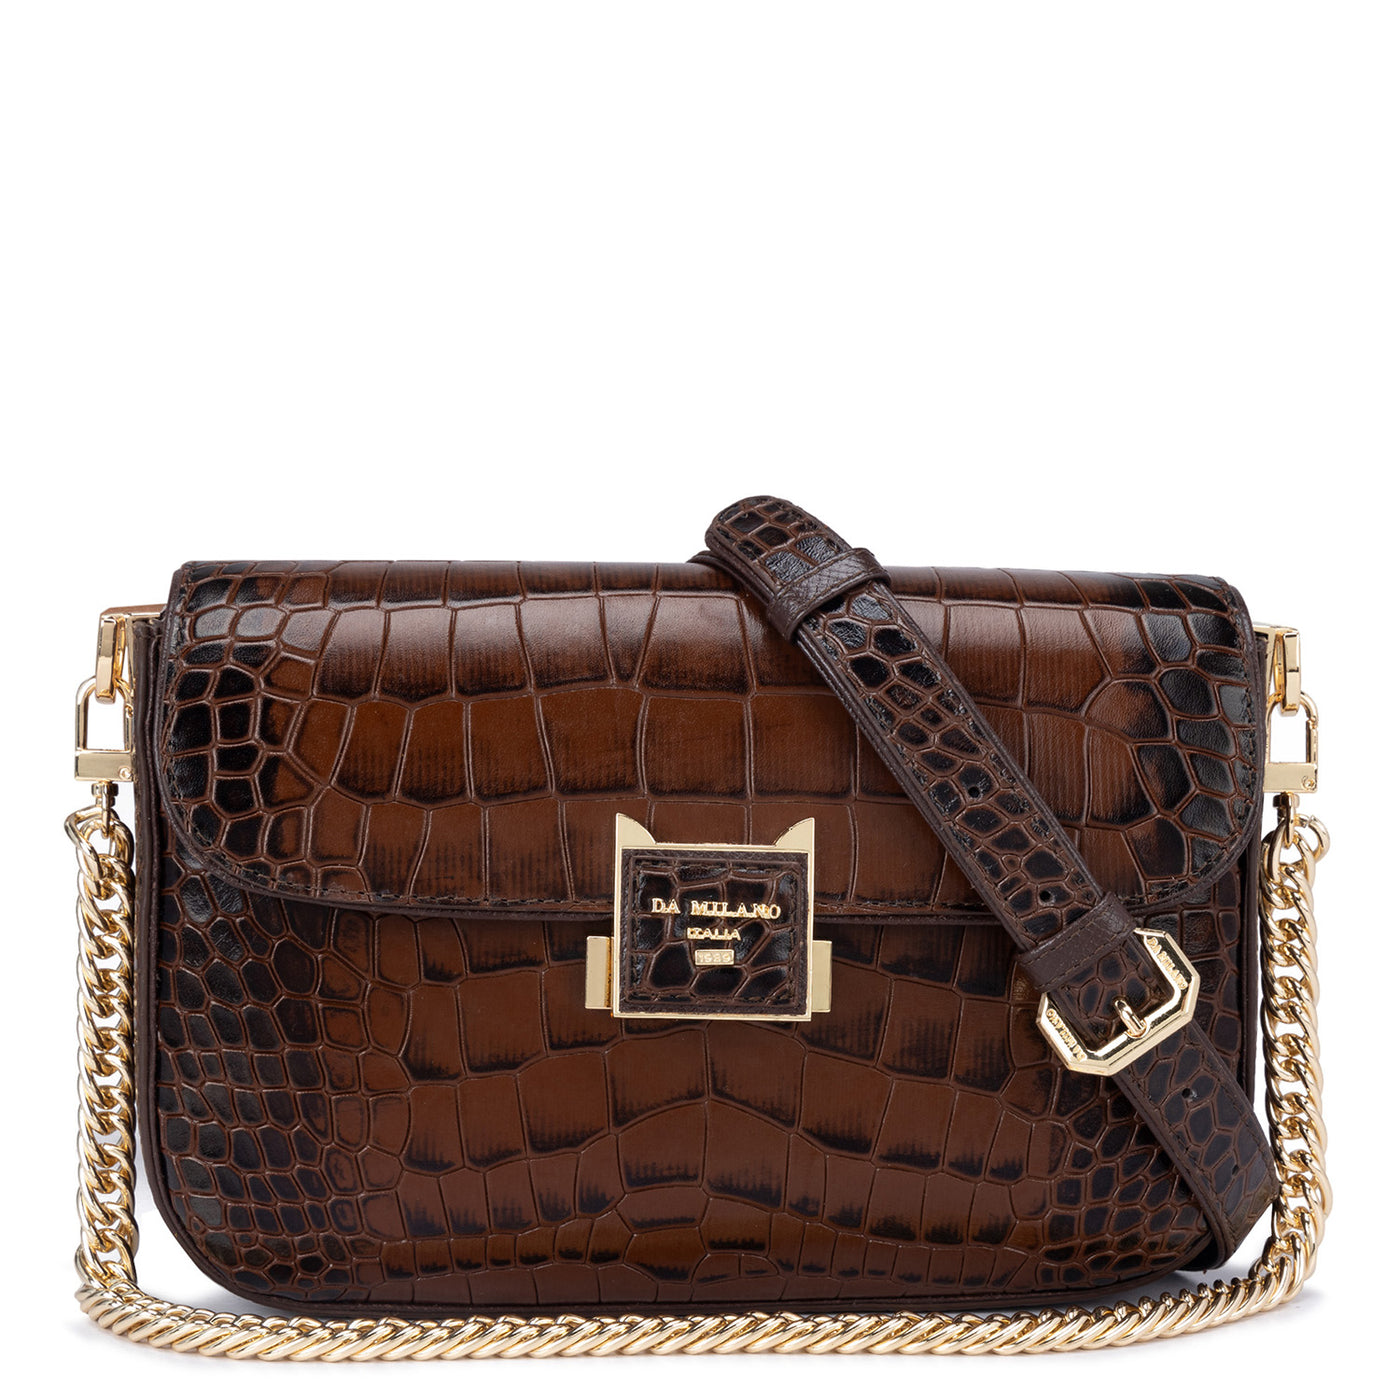 Small Croco Leather Shoulder Bag - Brown